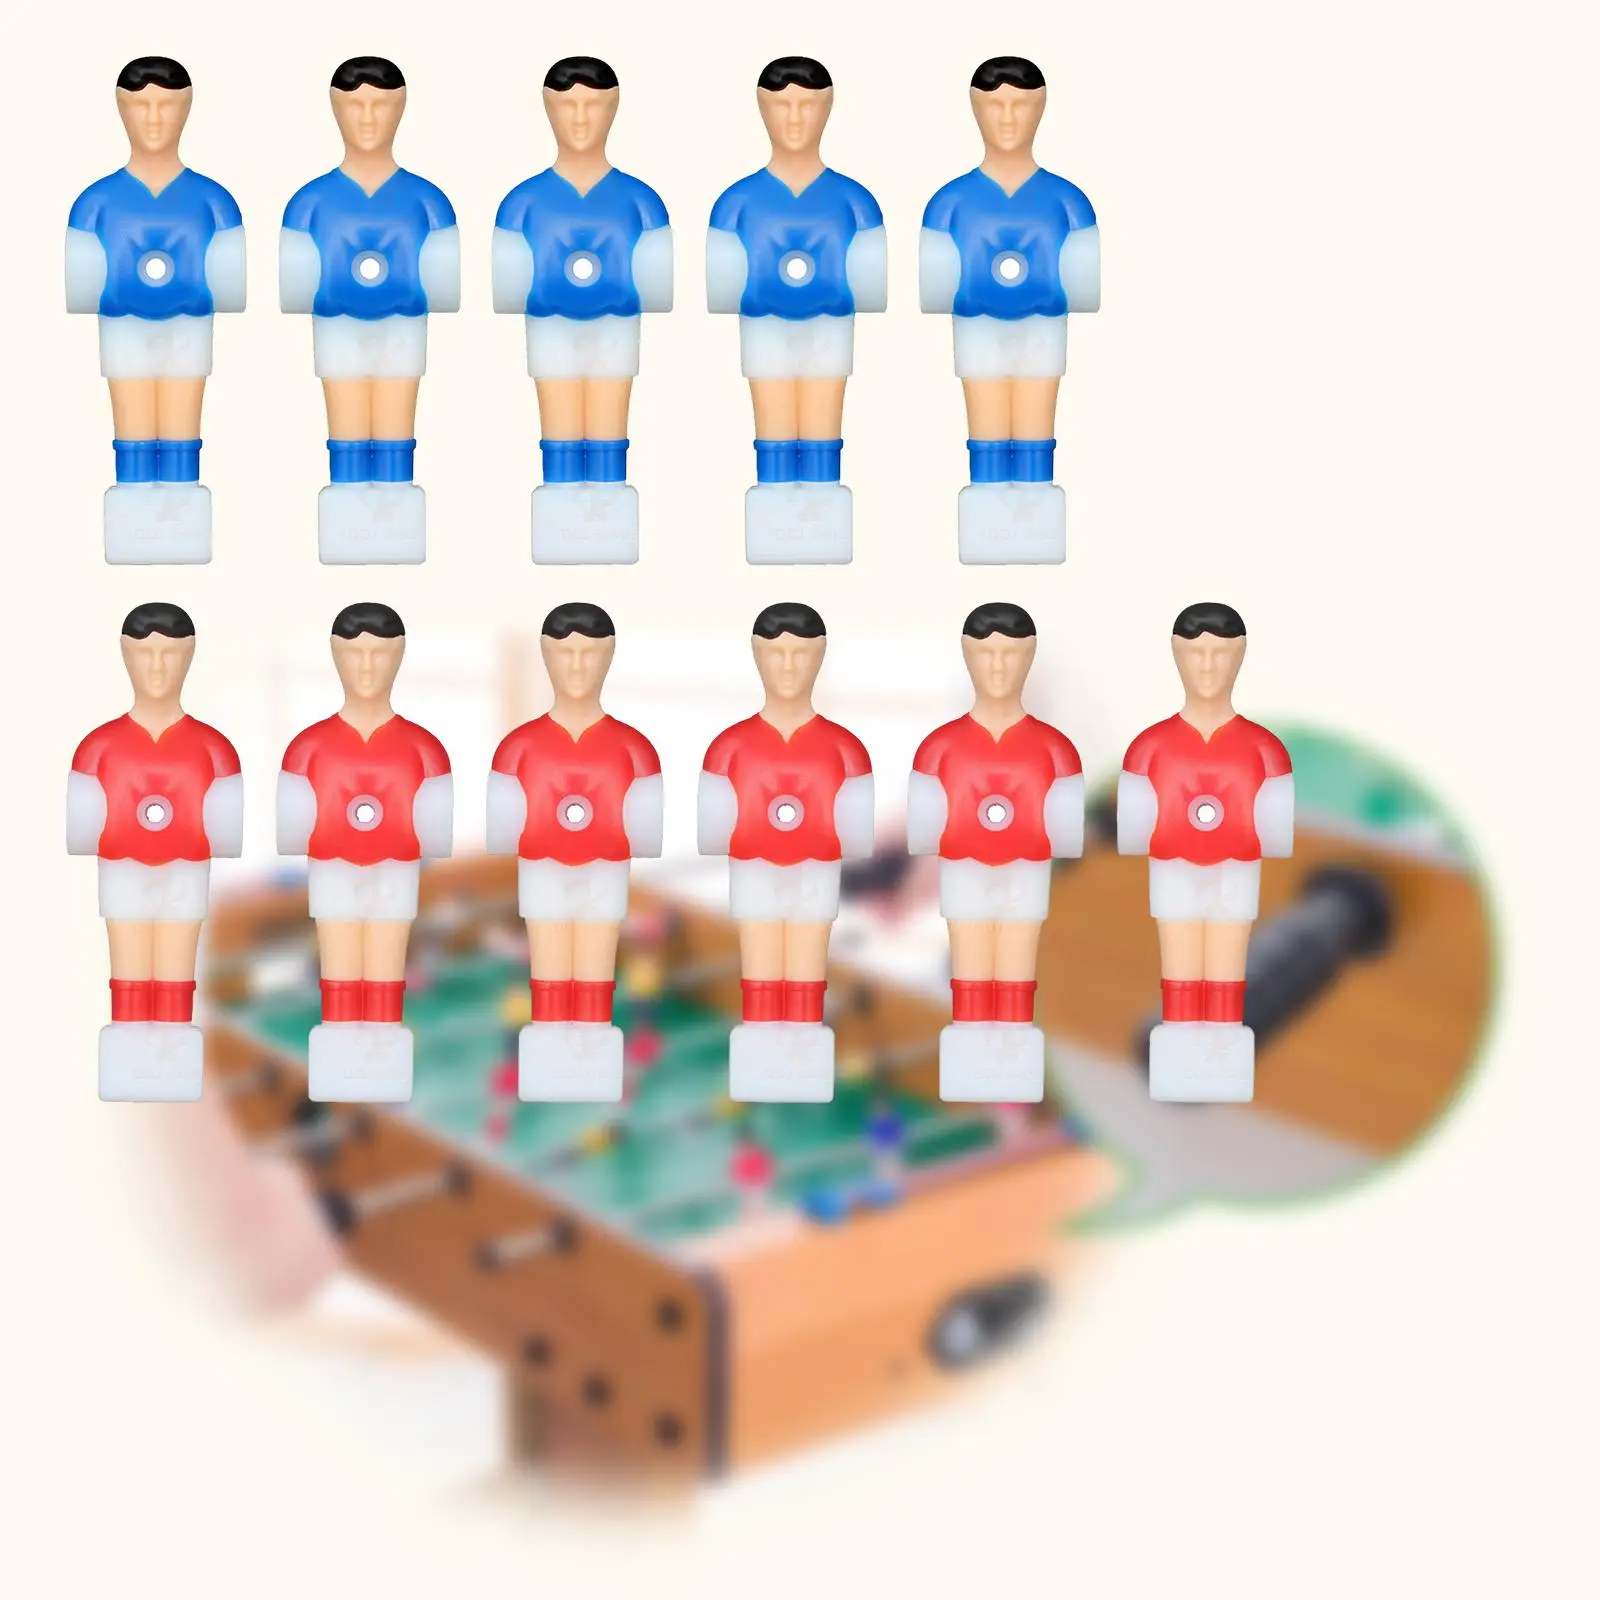 11x Foosball Men Replacement Set Foosball Player Soccer Games Mini Football Players Table Soccer Men for Table Football Game